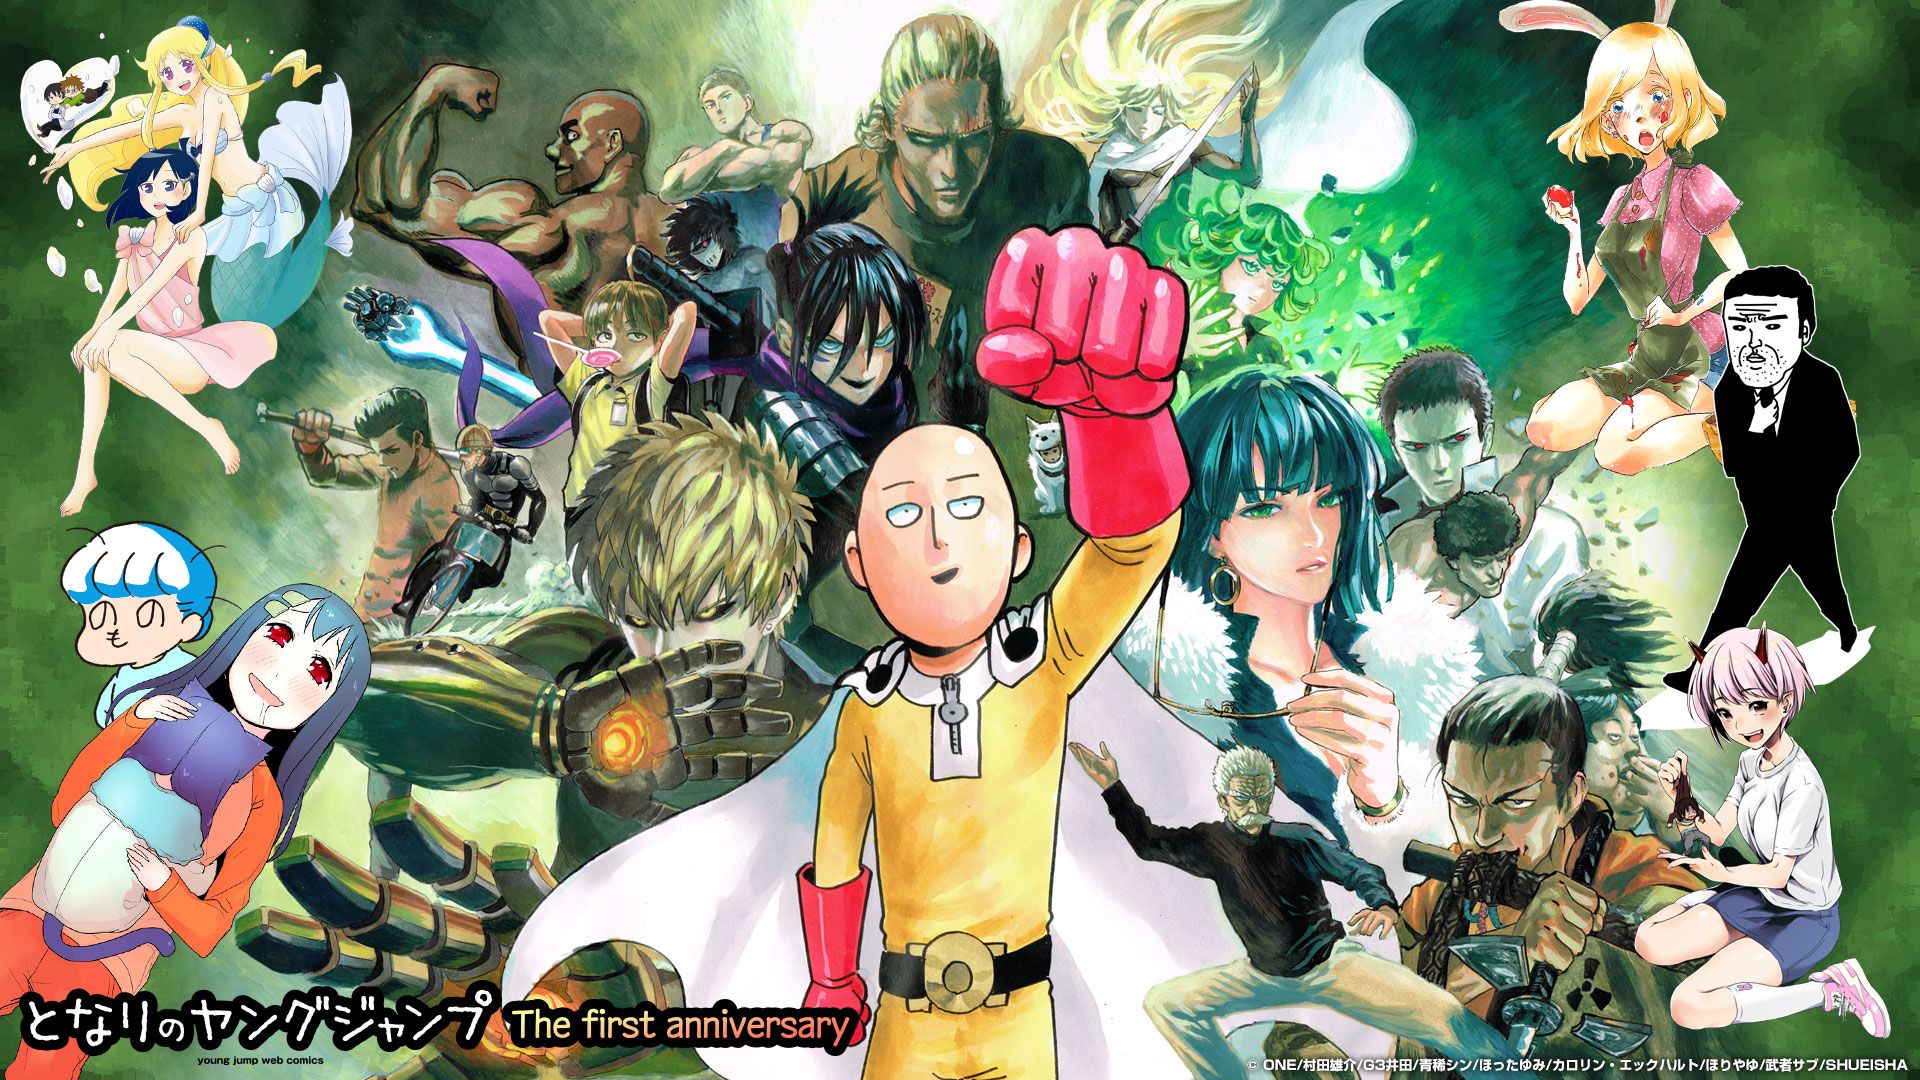 One Punch Man Hd Wallpapers For Pc - Wallpaperforu